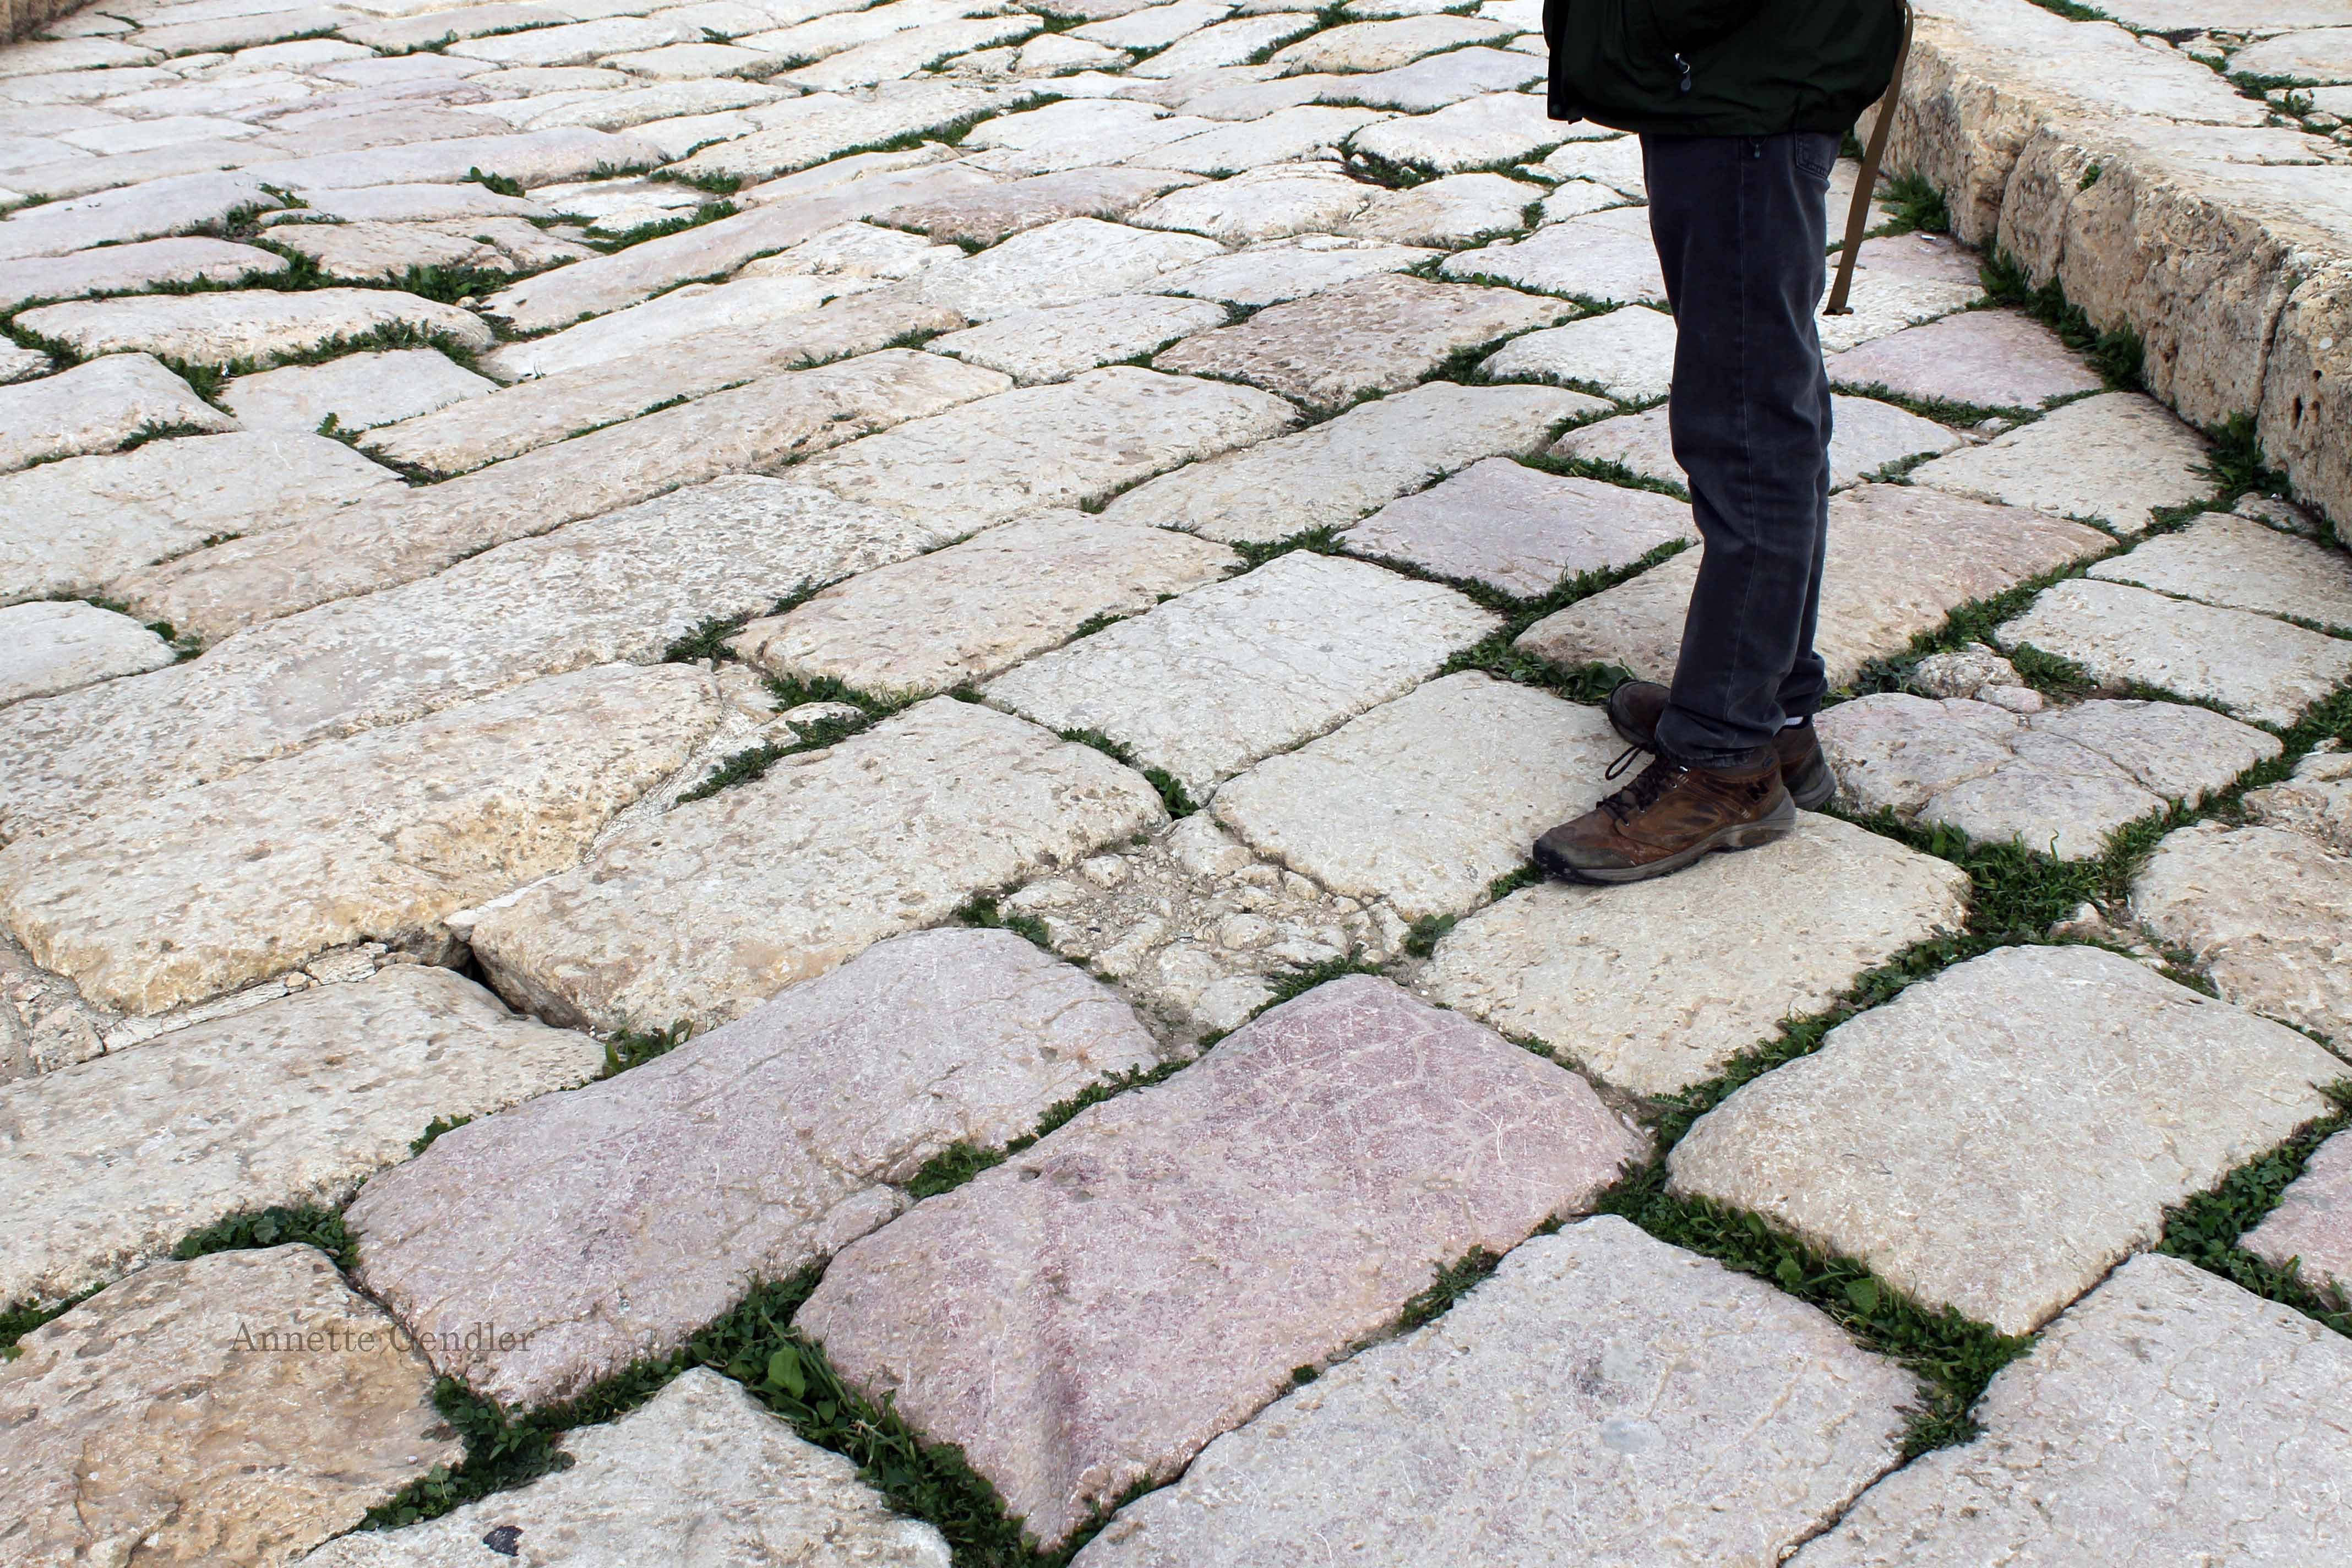 Roman pavement, wavy from earthquake, seen with person standing on it